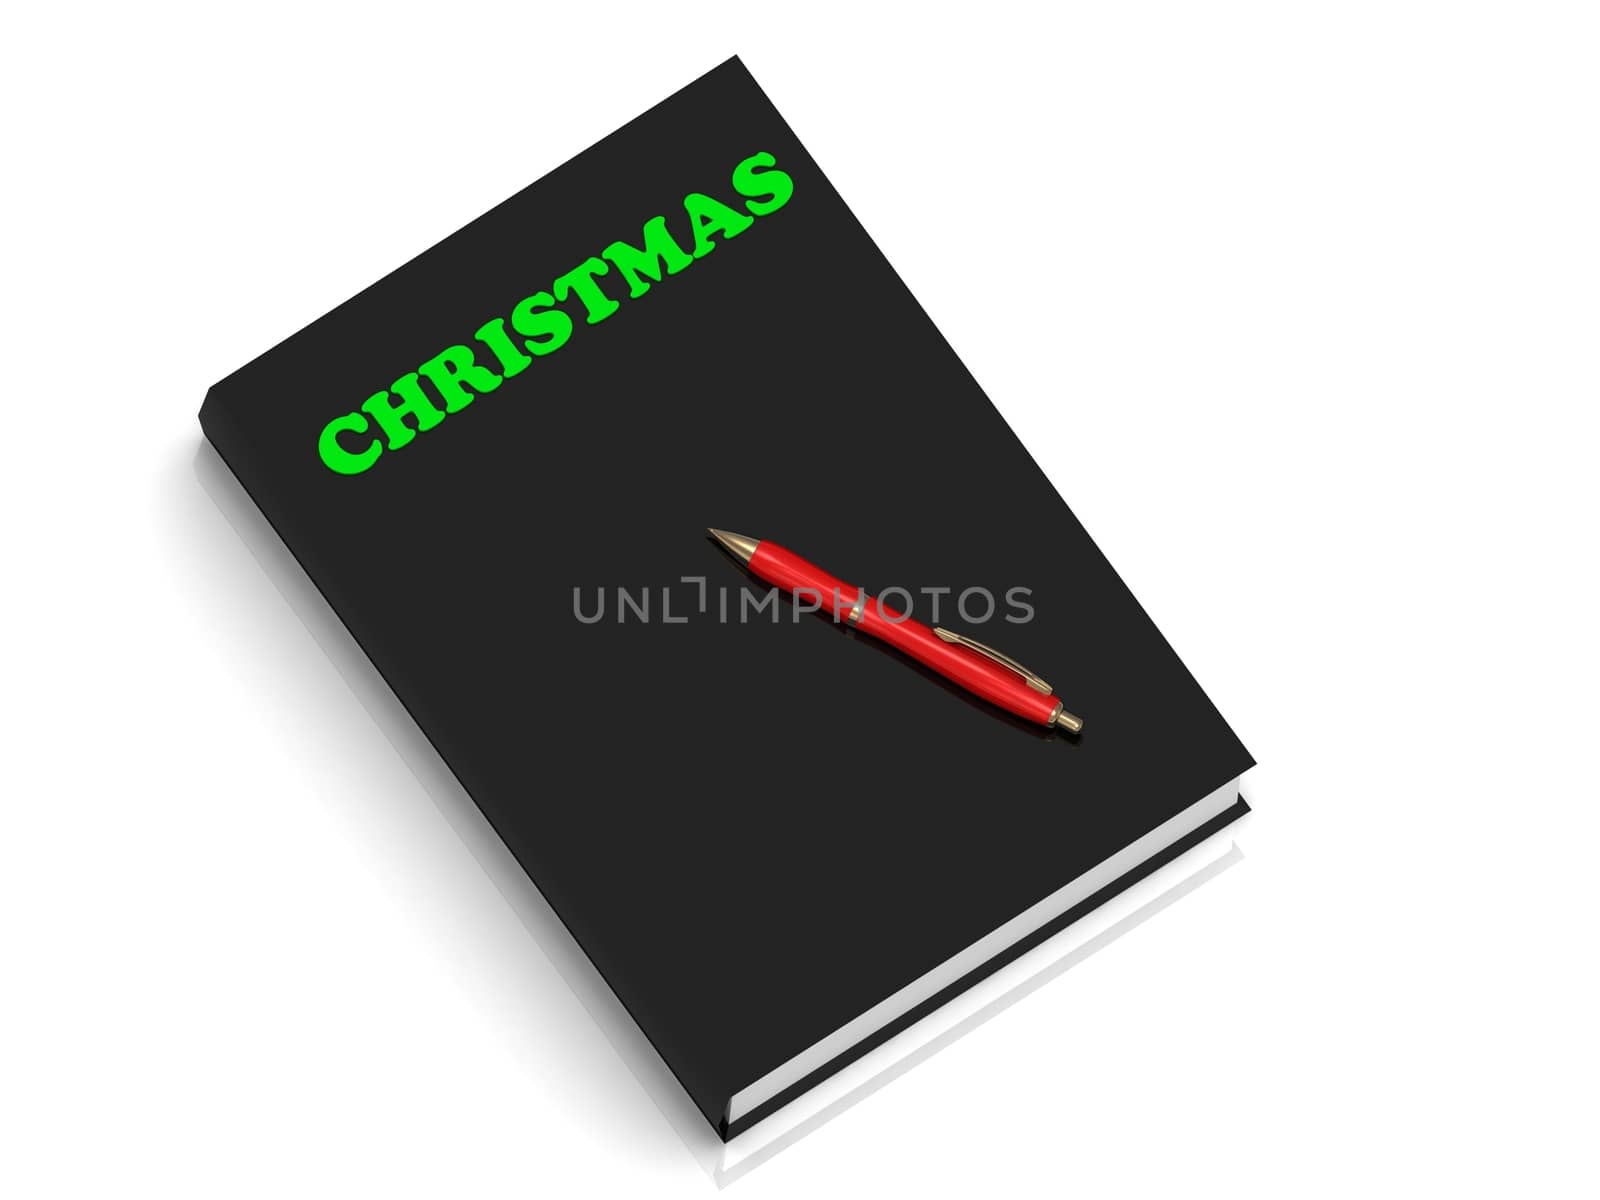 CHRISTMAS- inscription of green letters on black book on white background